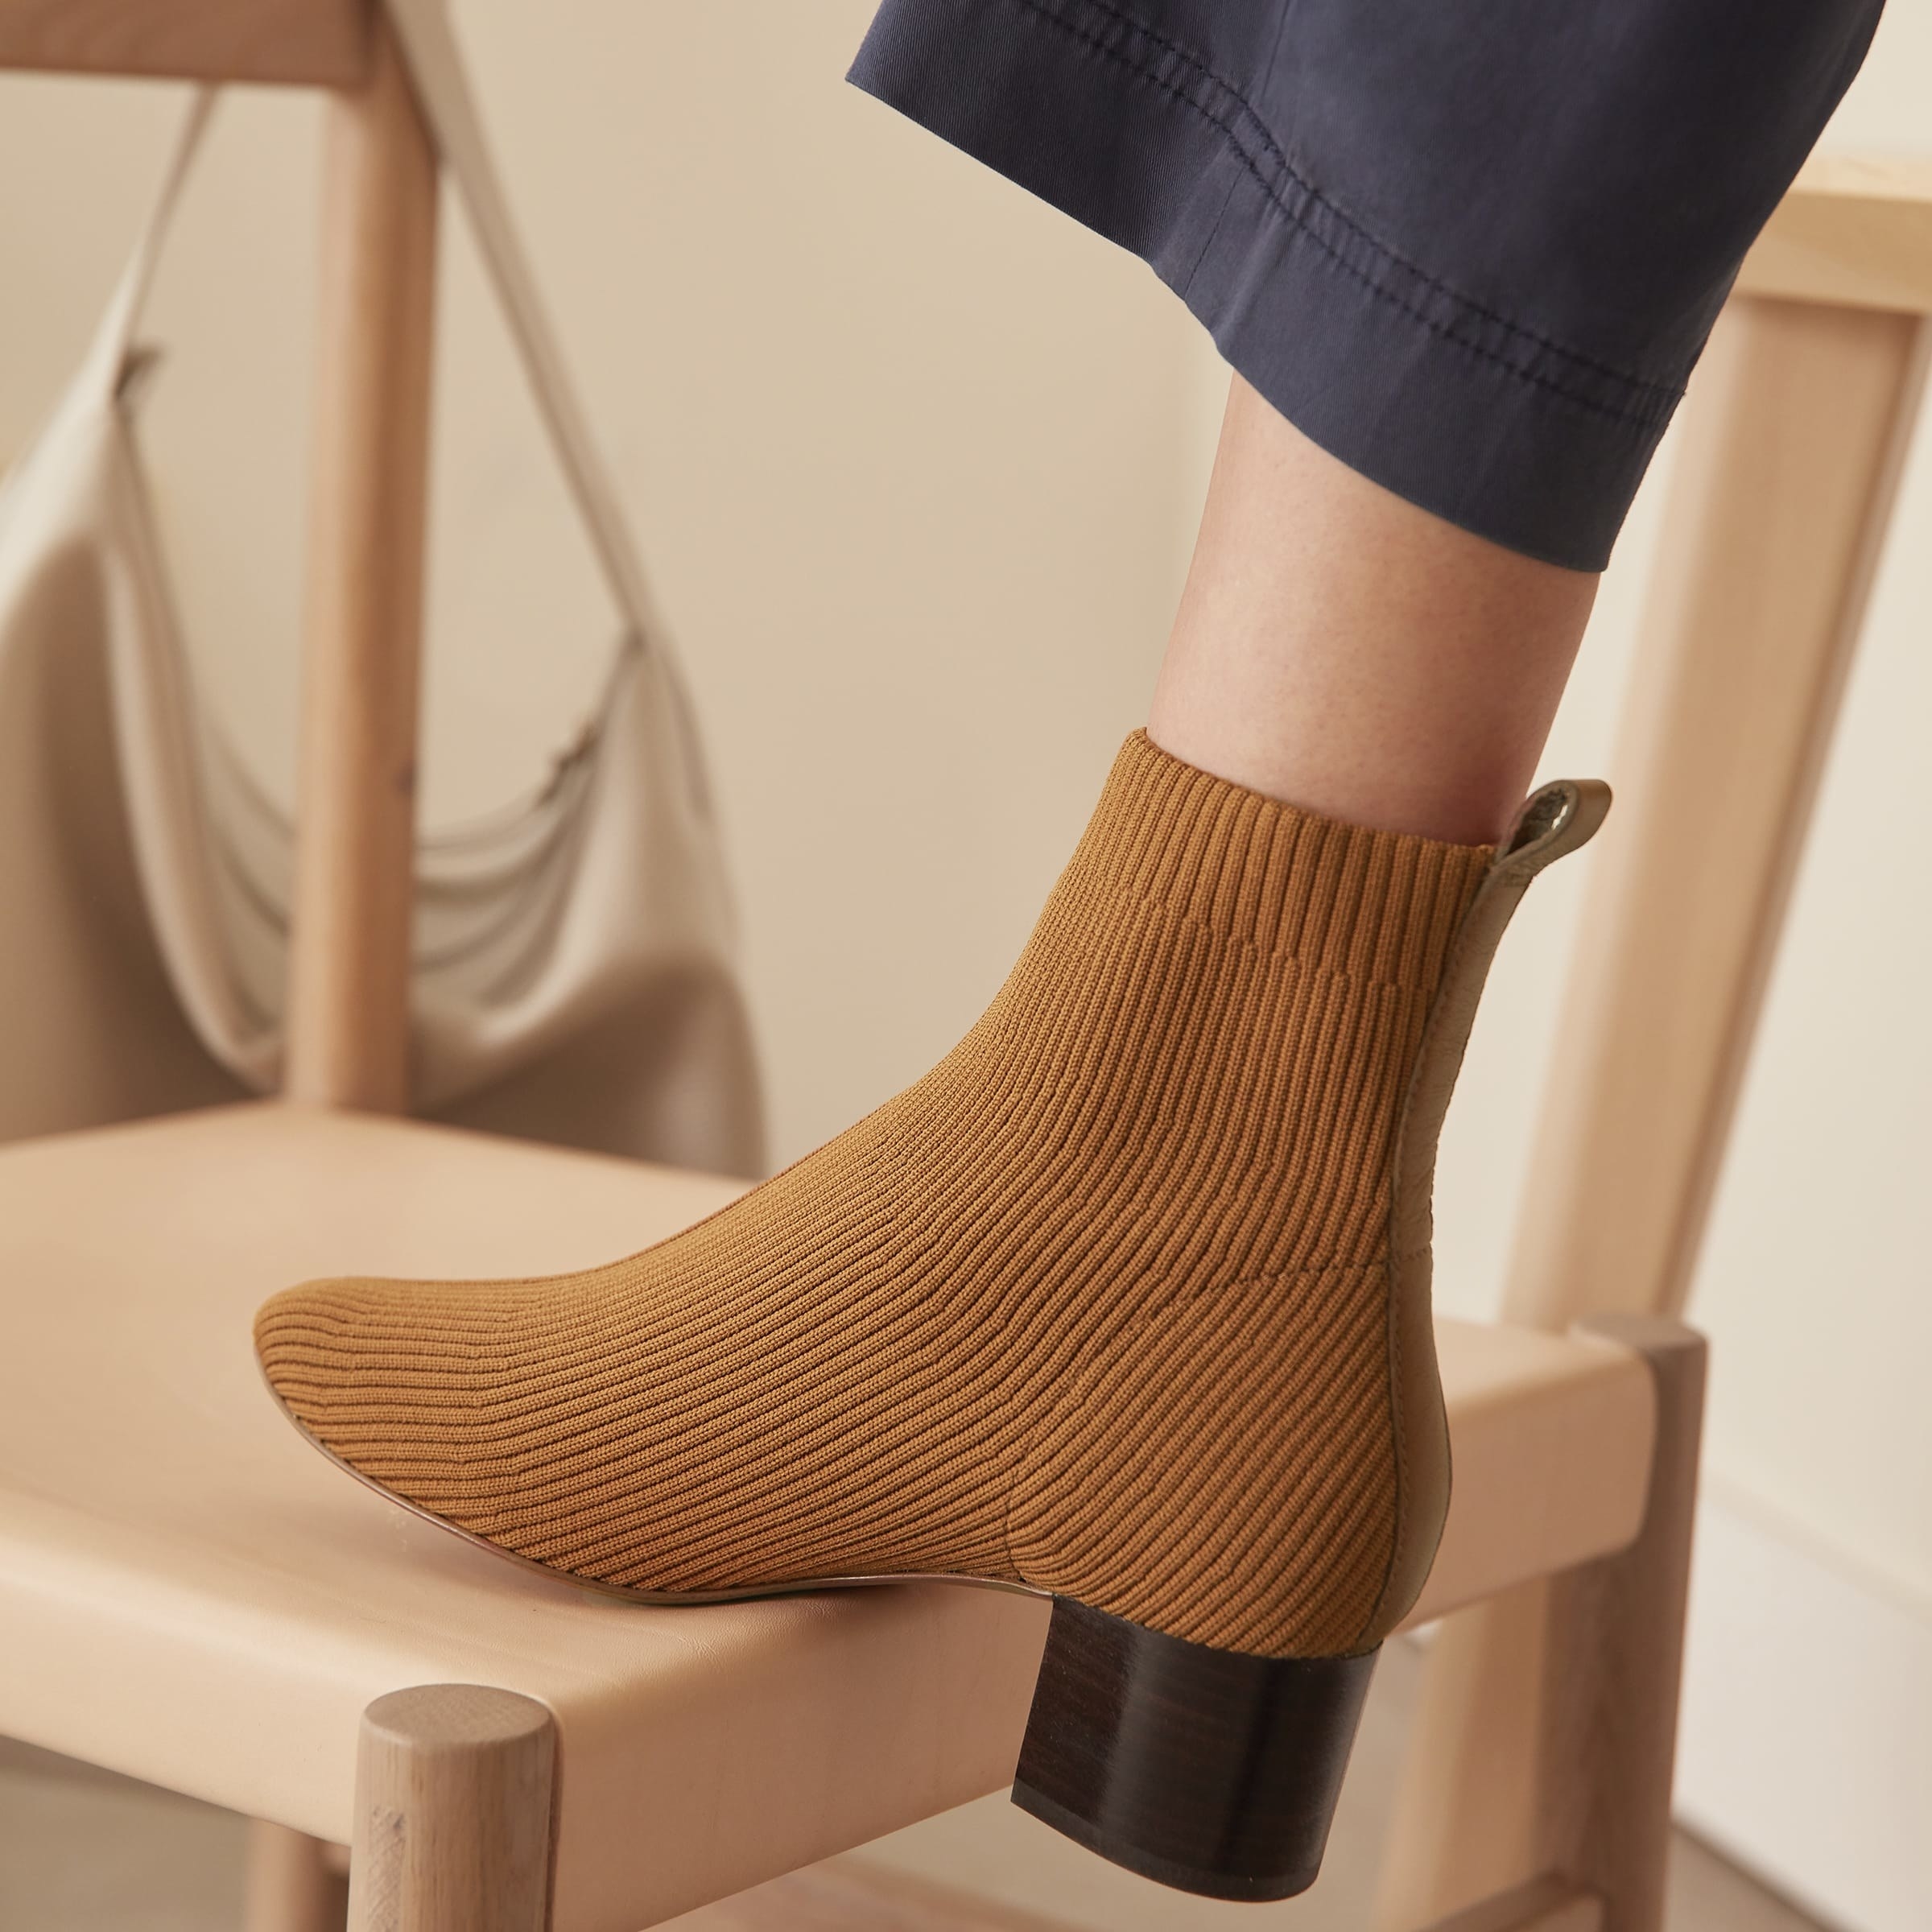 woven knit high ankle boots in toffee with a dark brown wooden heel